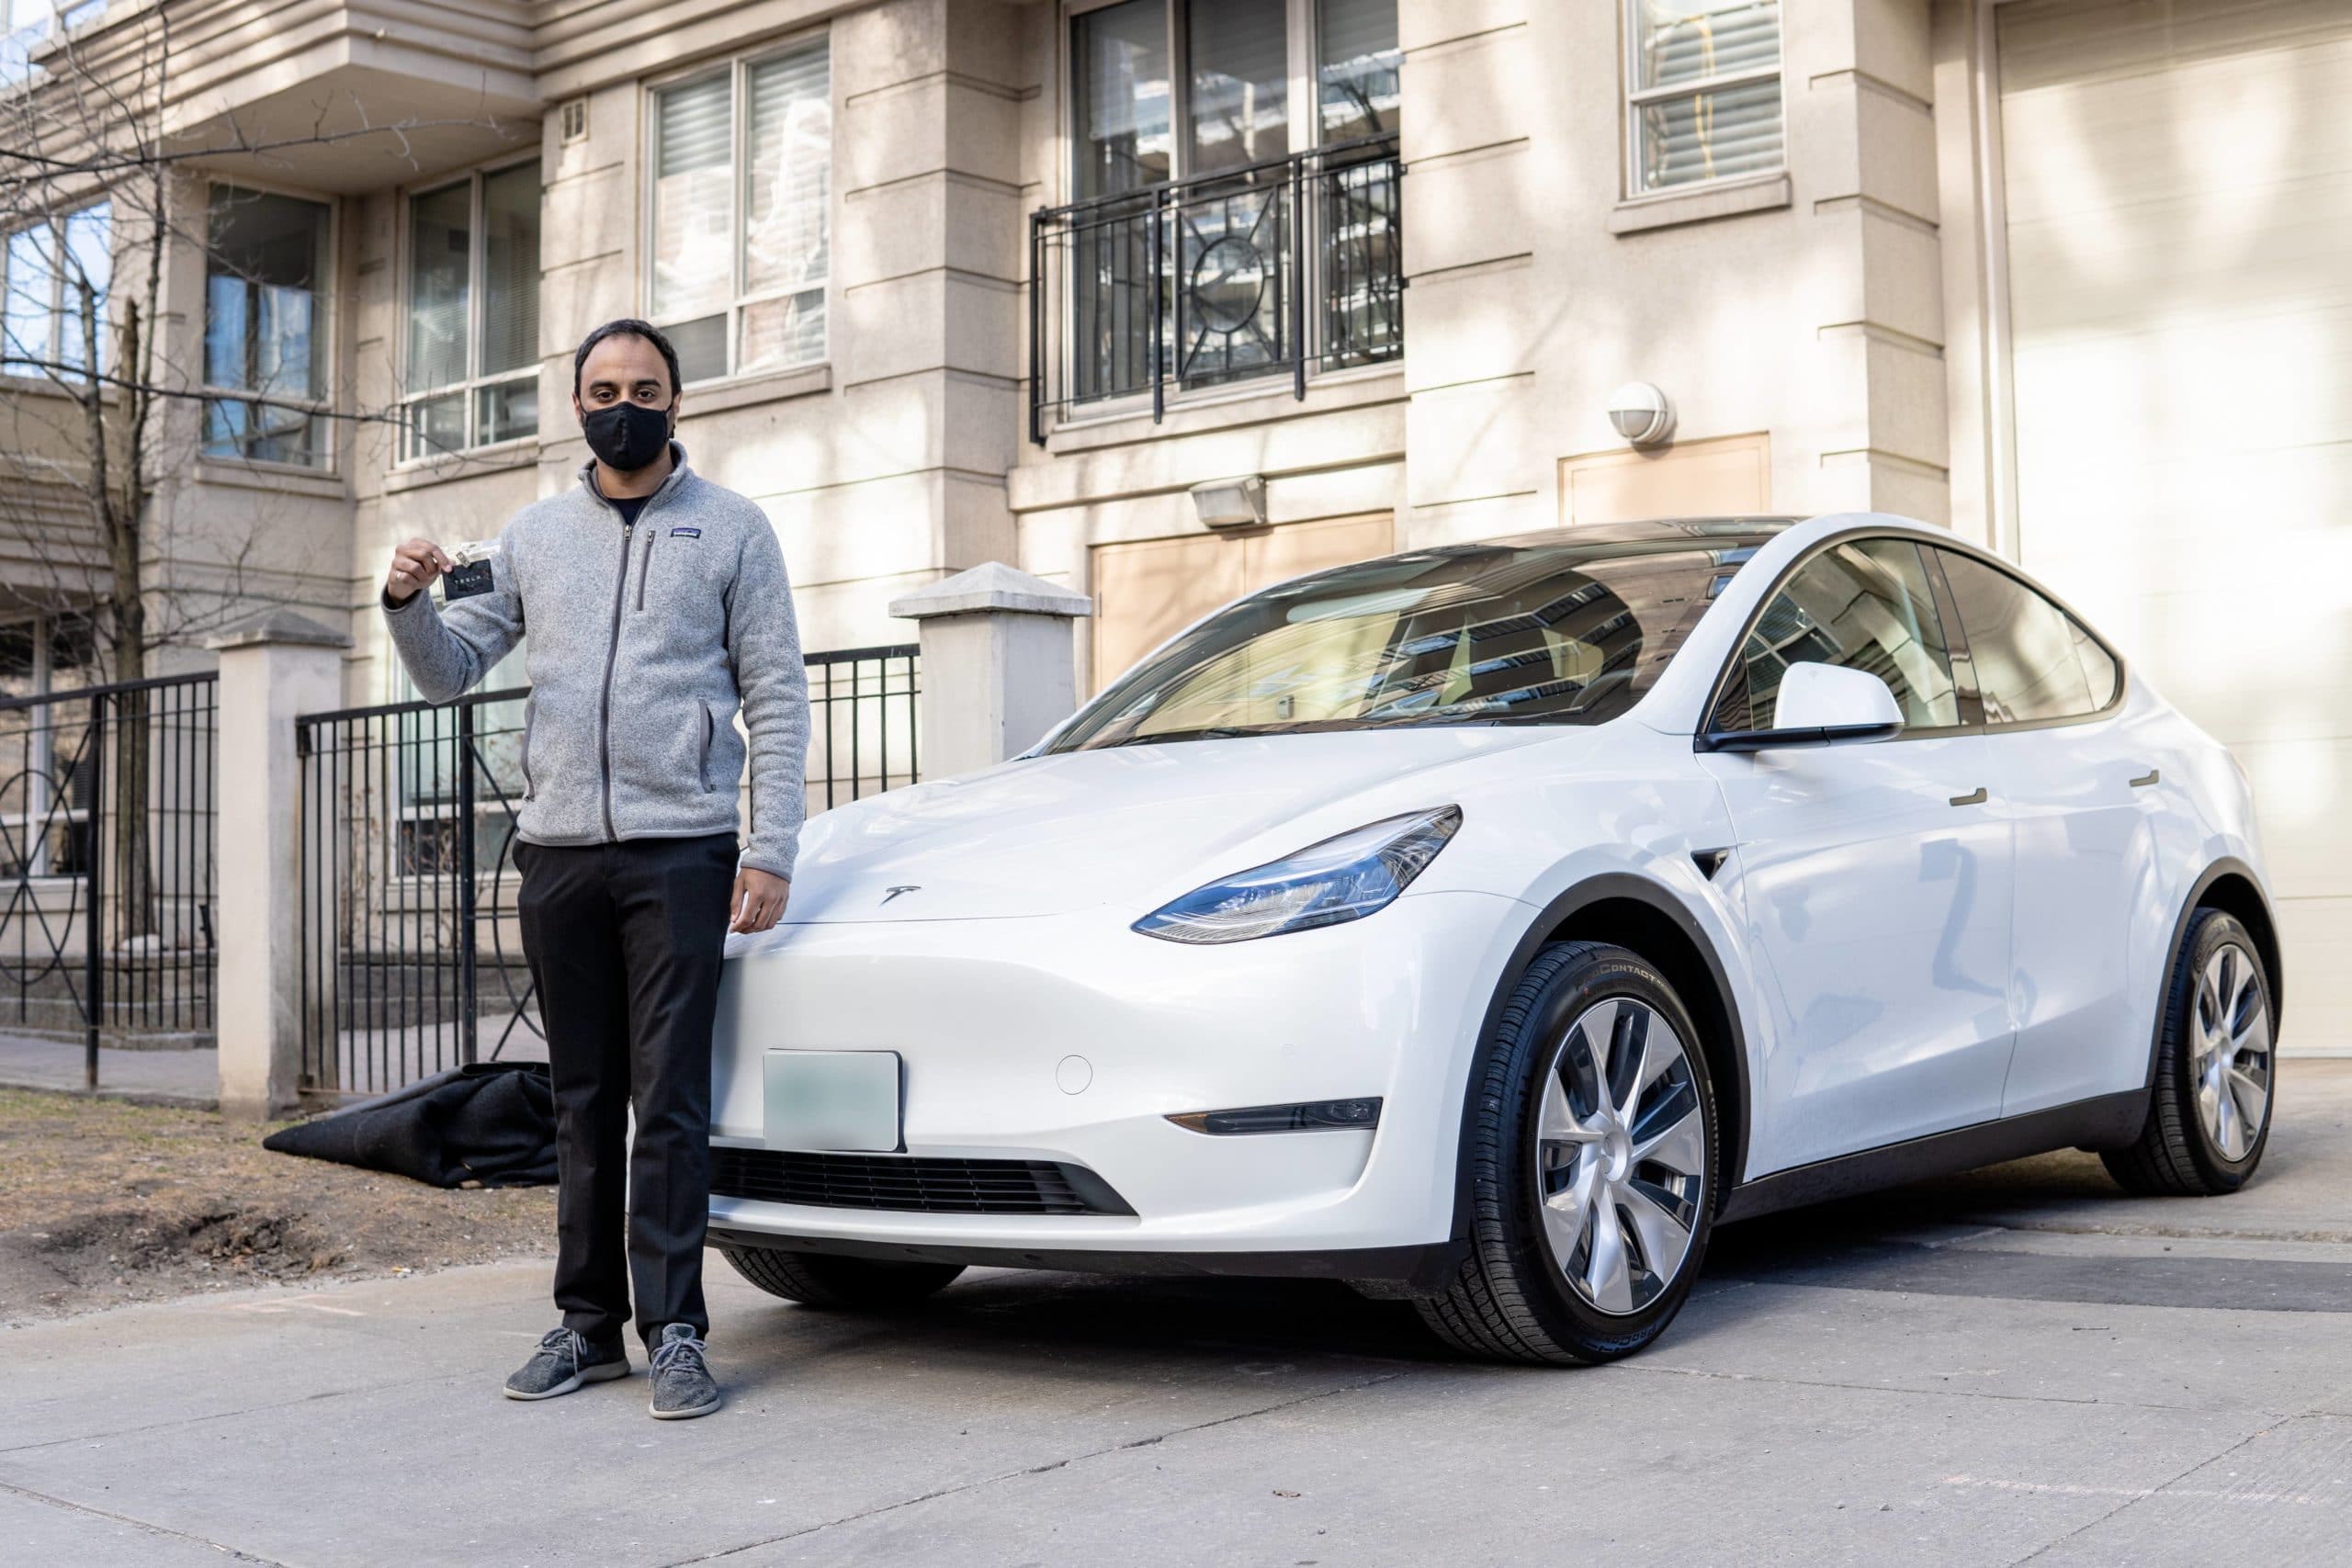 Facedrive Steer EV Subscription Service Launched in Toronto